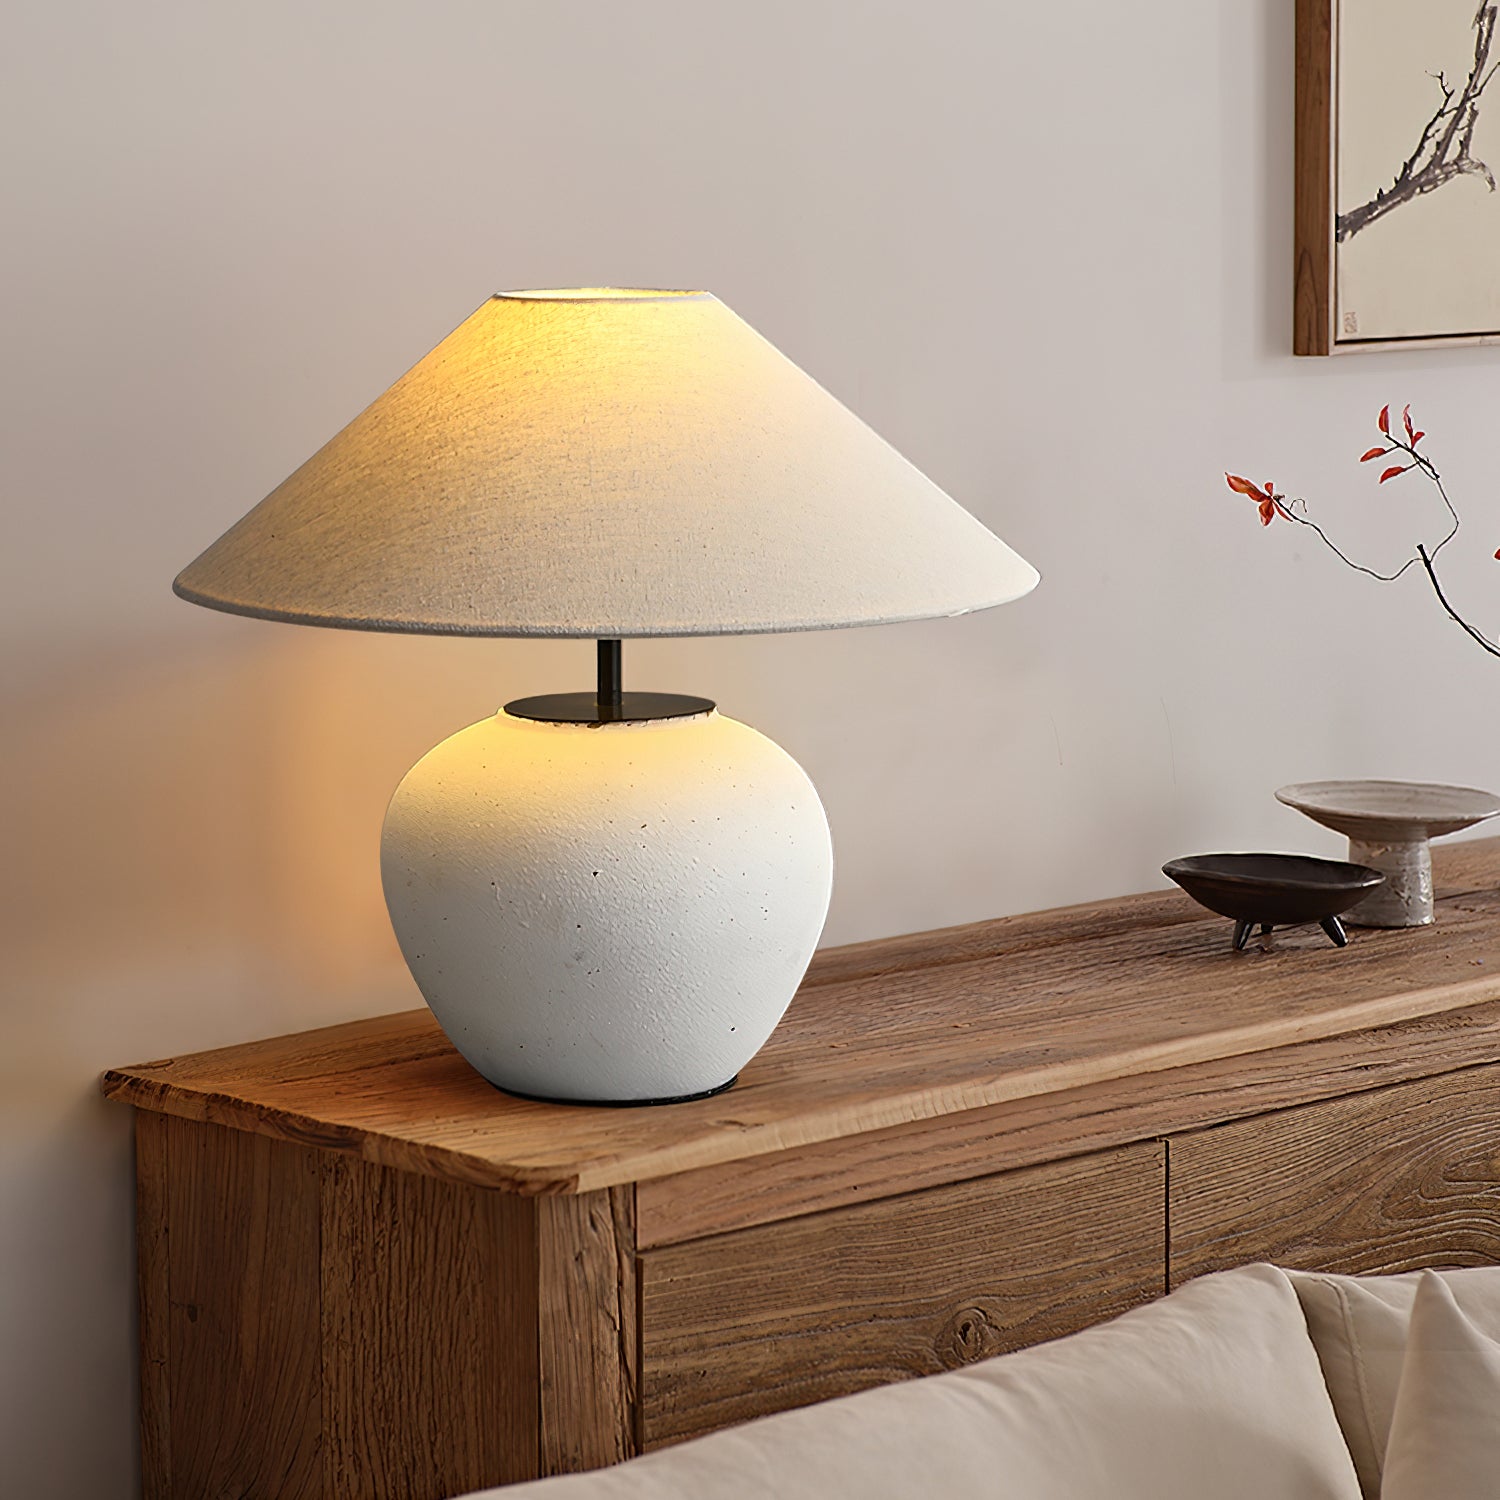 Explore the Charm: A Guide to Handcrafted Ceramic Table Lamps